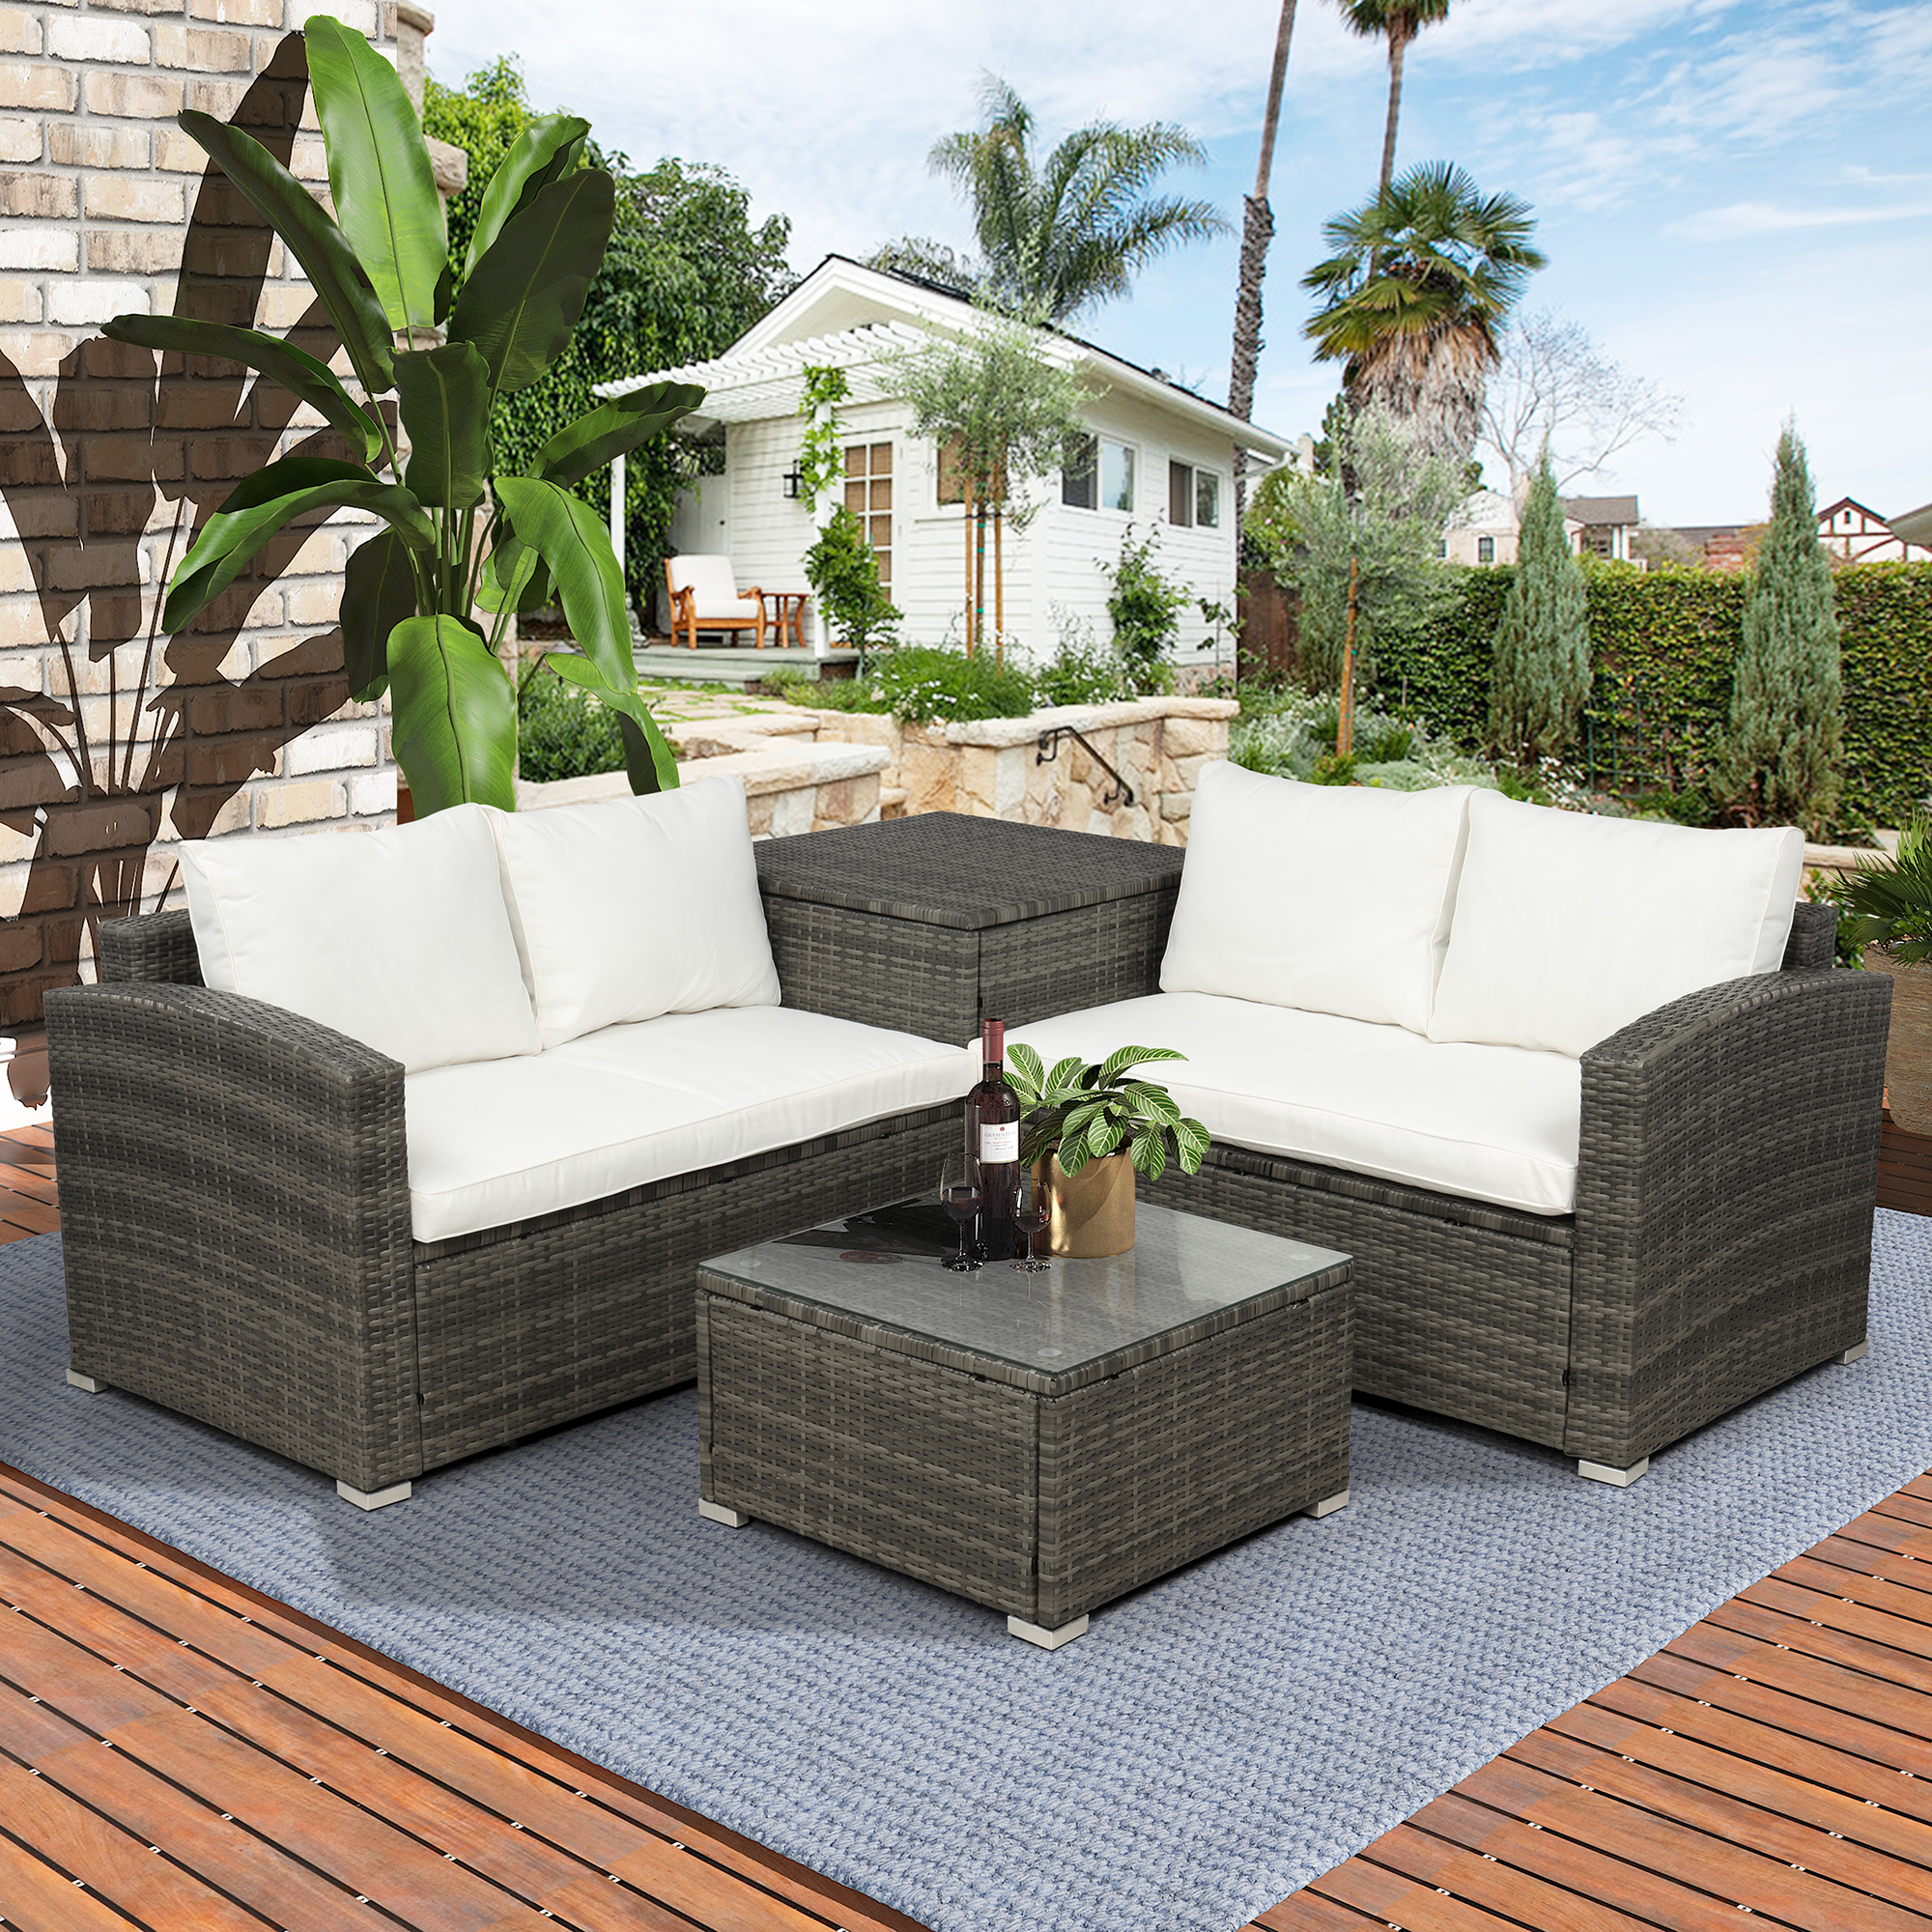 4 Pcs Patio Sectional Sofa Sets Outdoor Patio Furniture Sets Conversation Sets, Wicker Rattan Sectional Couch Sofa Set with Cushions, Pillows and Coffee Table - image 4 of 8